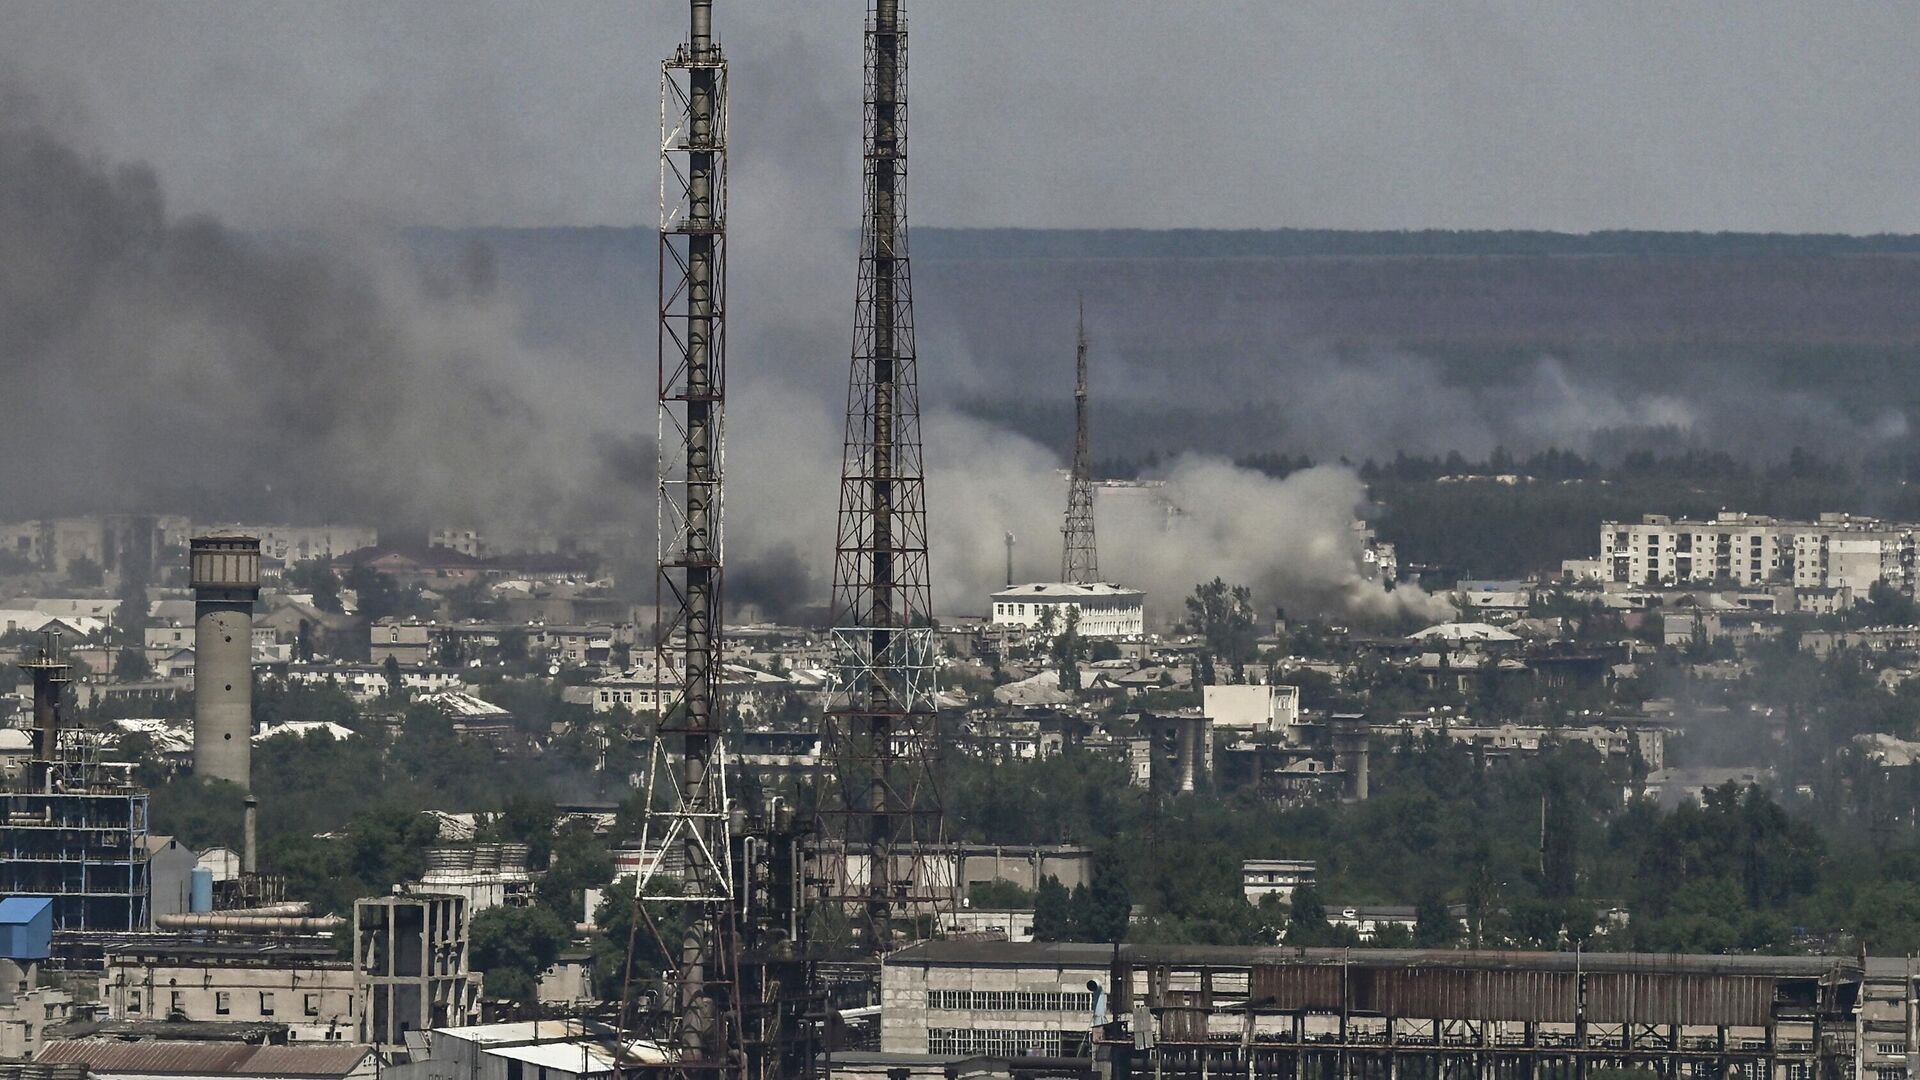 Black smoke and dirt rise from the nearby city of Severodonetsk during battle between Russian and Ukrainian troops in Donbass on 9 June, 2022. - Sputnik International, 1920, 28.06.2022